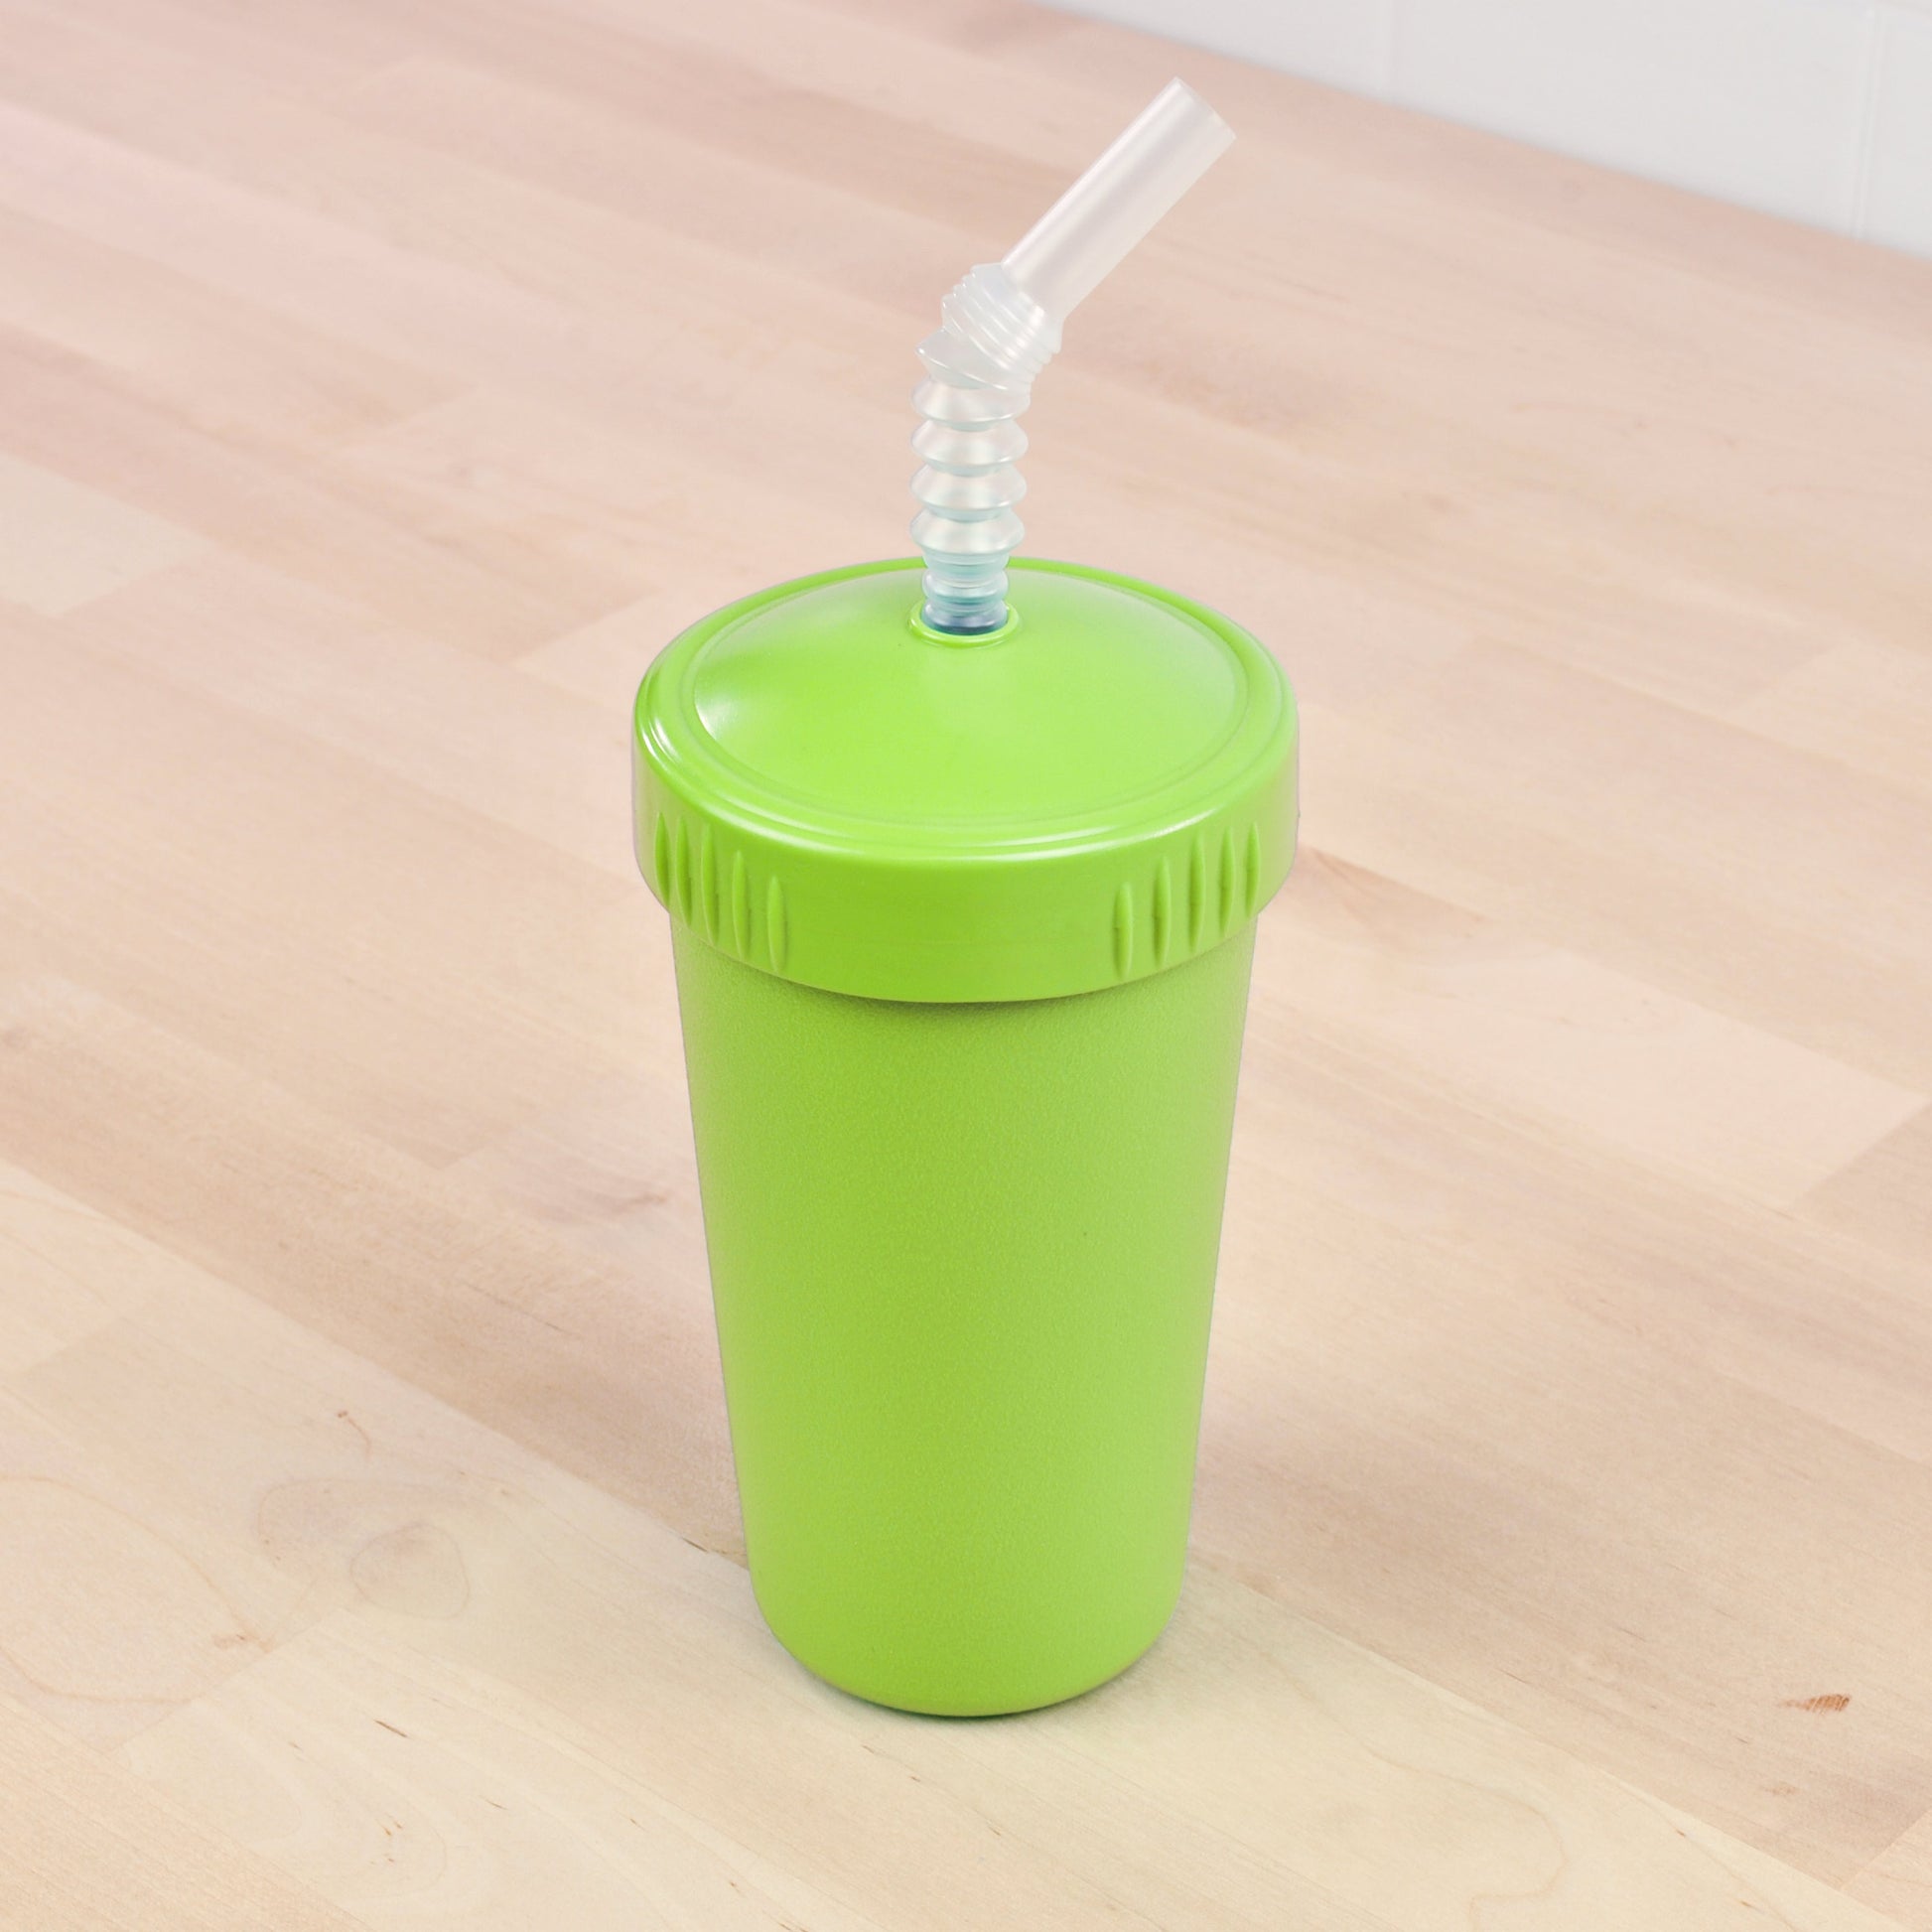 Re-Play Straw Cup in Lime Green from Bear & Moo